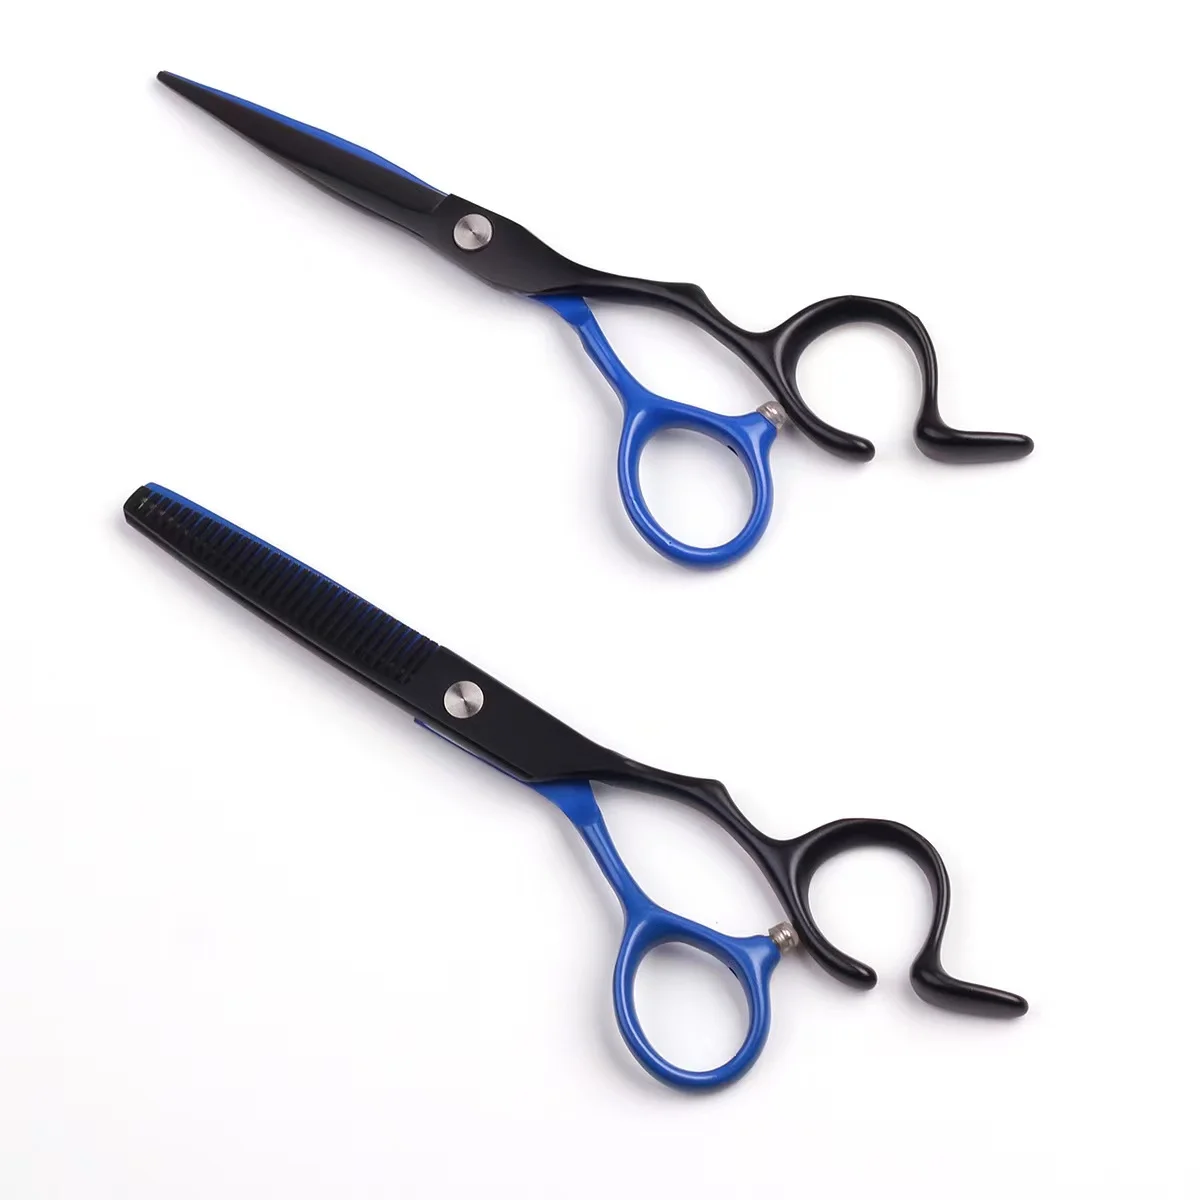 New Type Professional Japan Stainless Steel Salon Hairdressing Scissors Hair Cutting Shears Barber Thinning Scissors